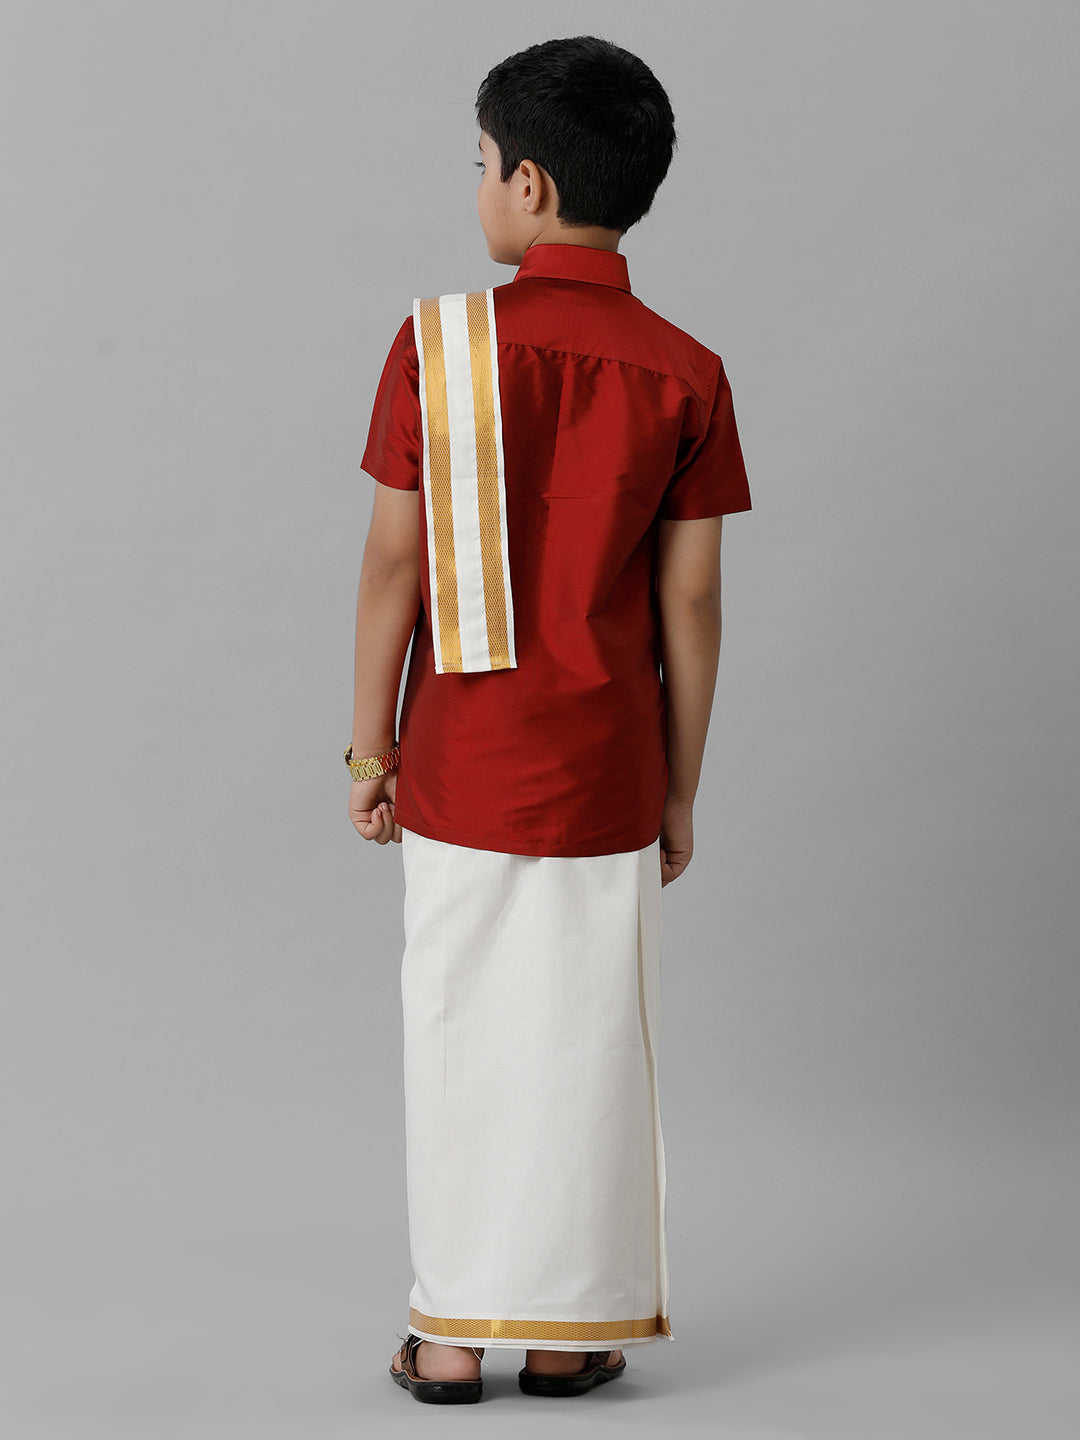 Boys Silk Cotton Red Half Sleeves Shirt with Adjustable Cream Dhoti Towel Combo K8-Back view